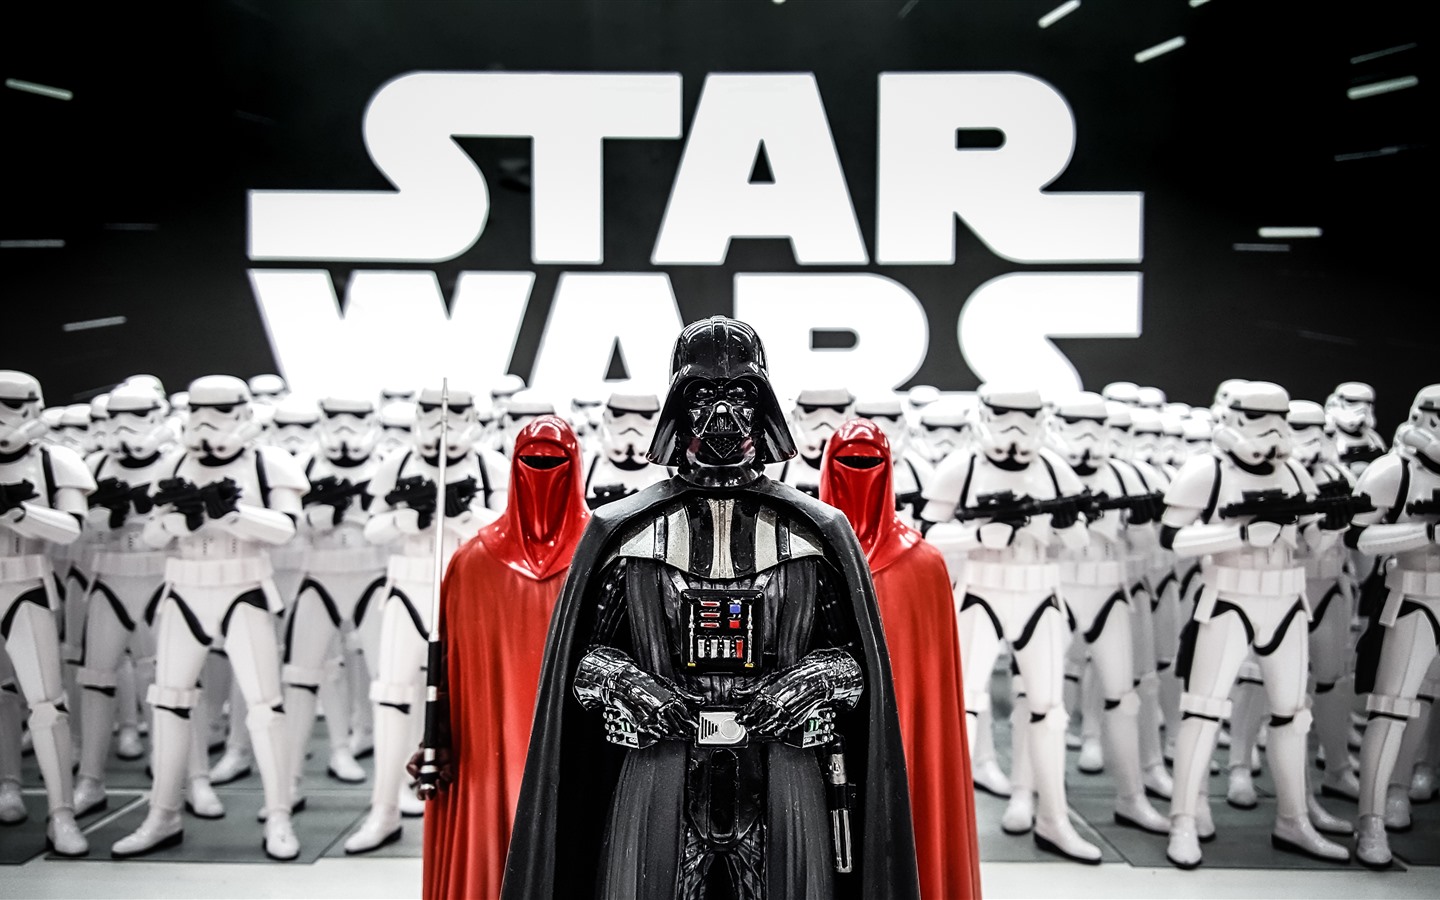 Wallpaper Star Wars, Darth Vader, soldiers 3840x2160 UHD 4K Picture, Image